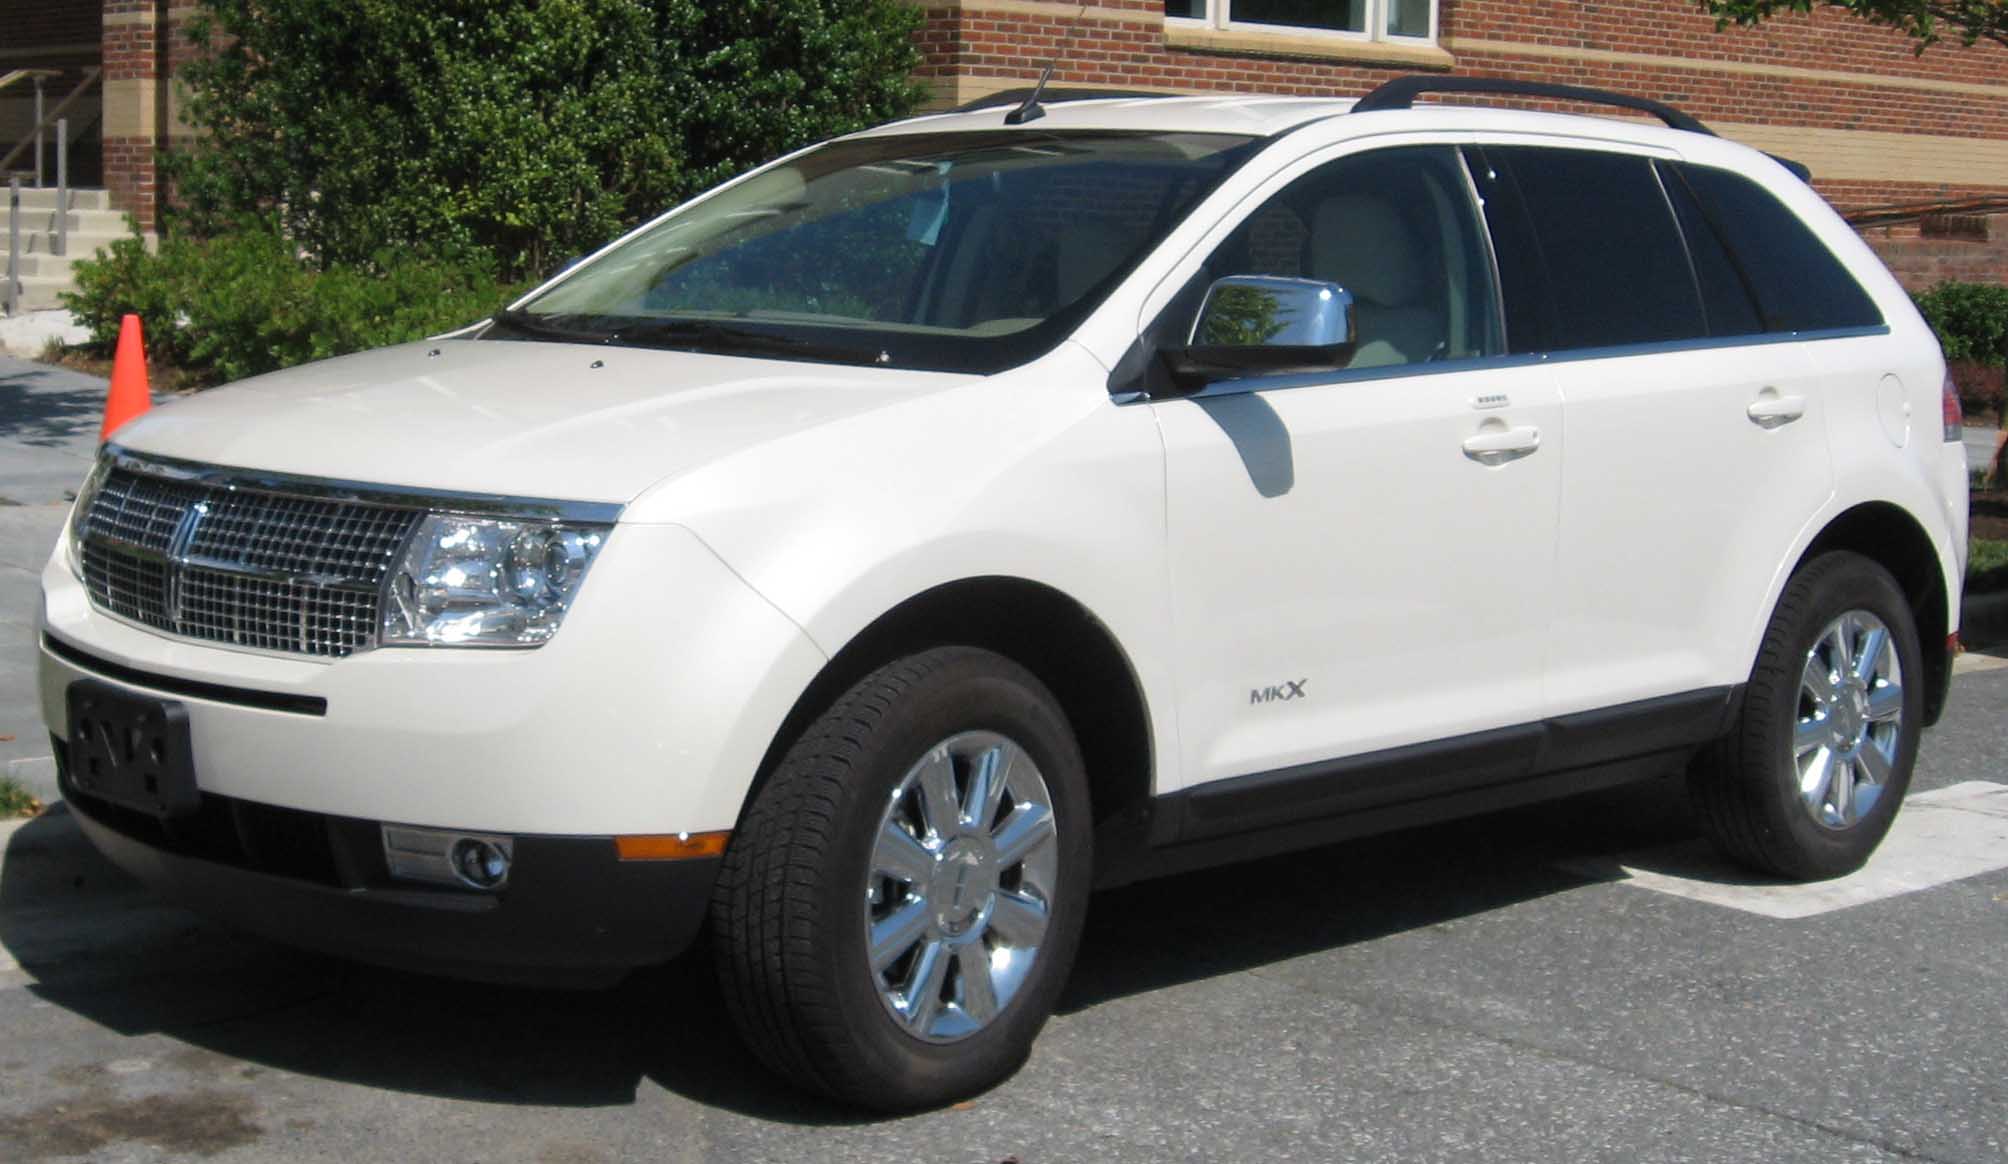  2007 MKX 